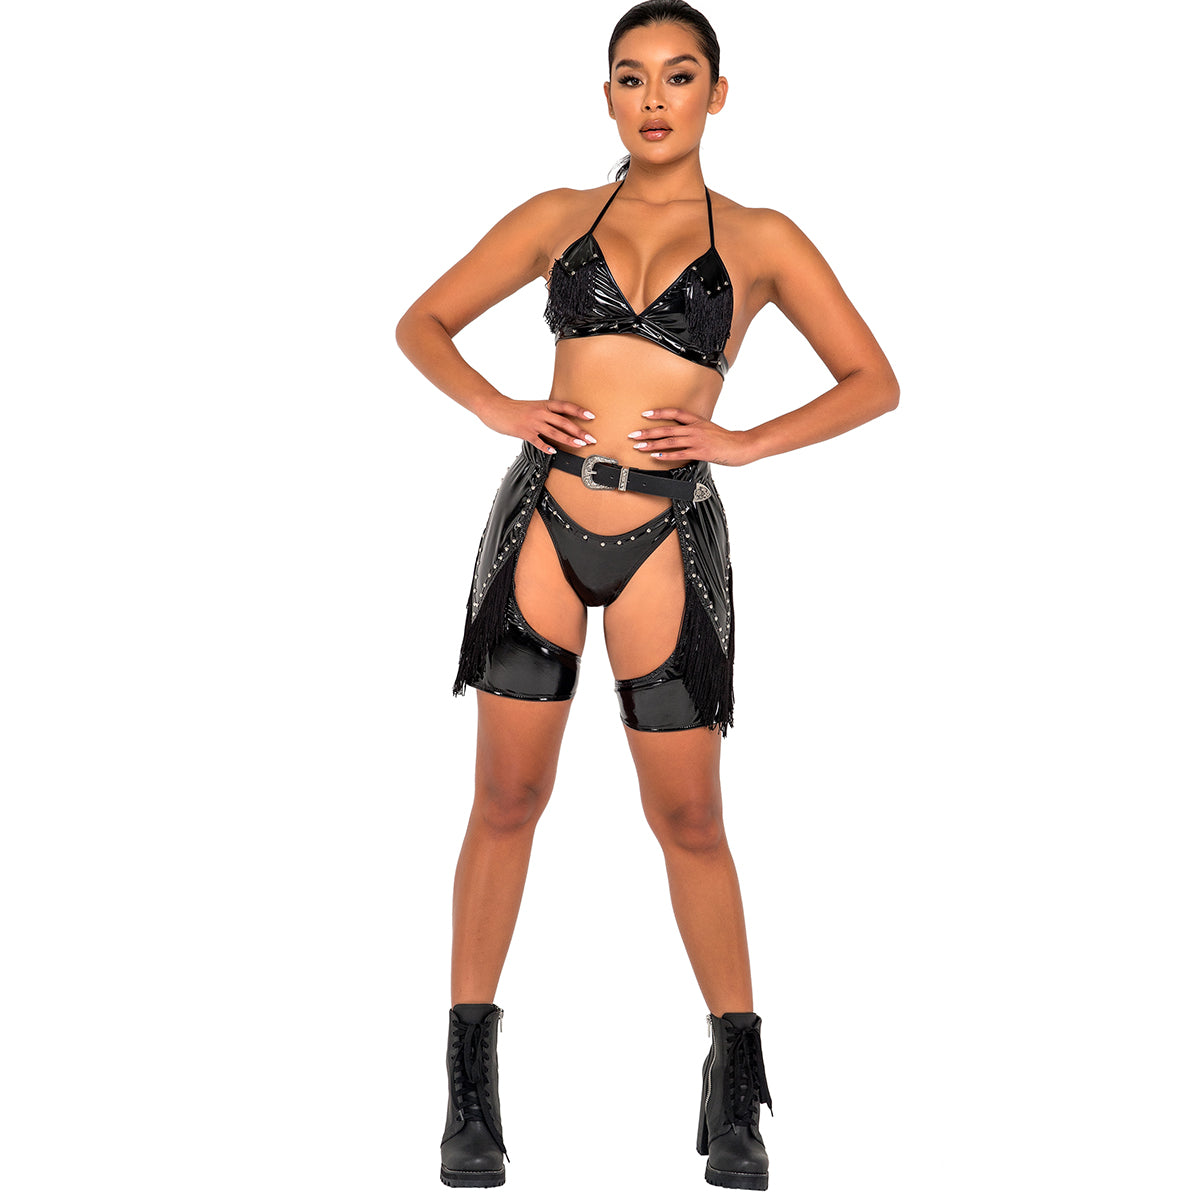 Studded Vinyl Bikini Top 6126 front view shown with Shorts 6127 and chaps 6128